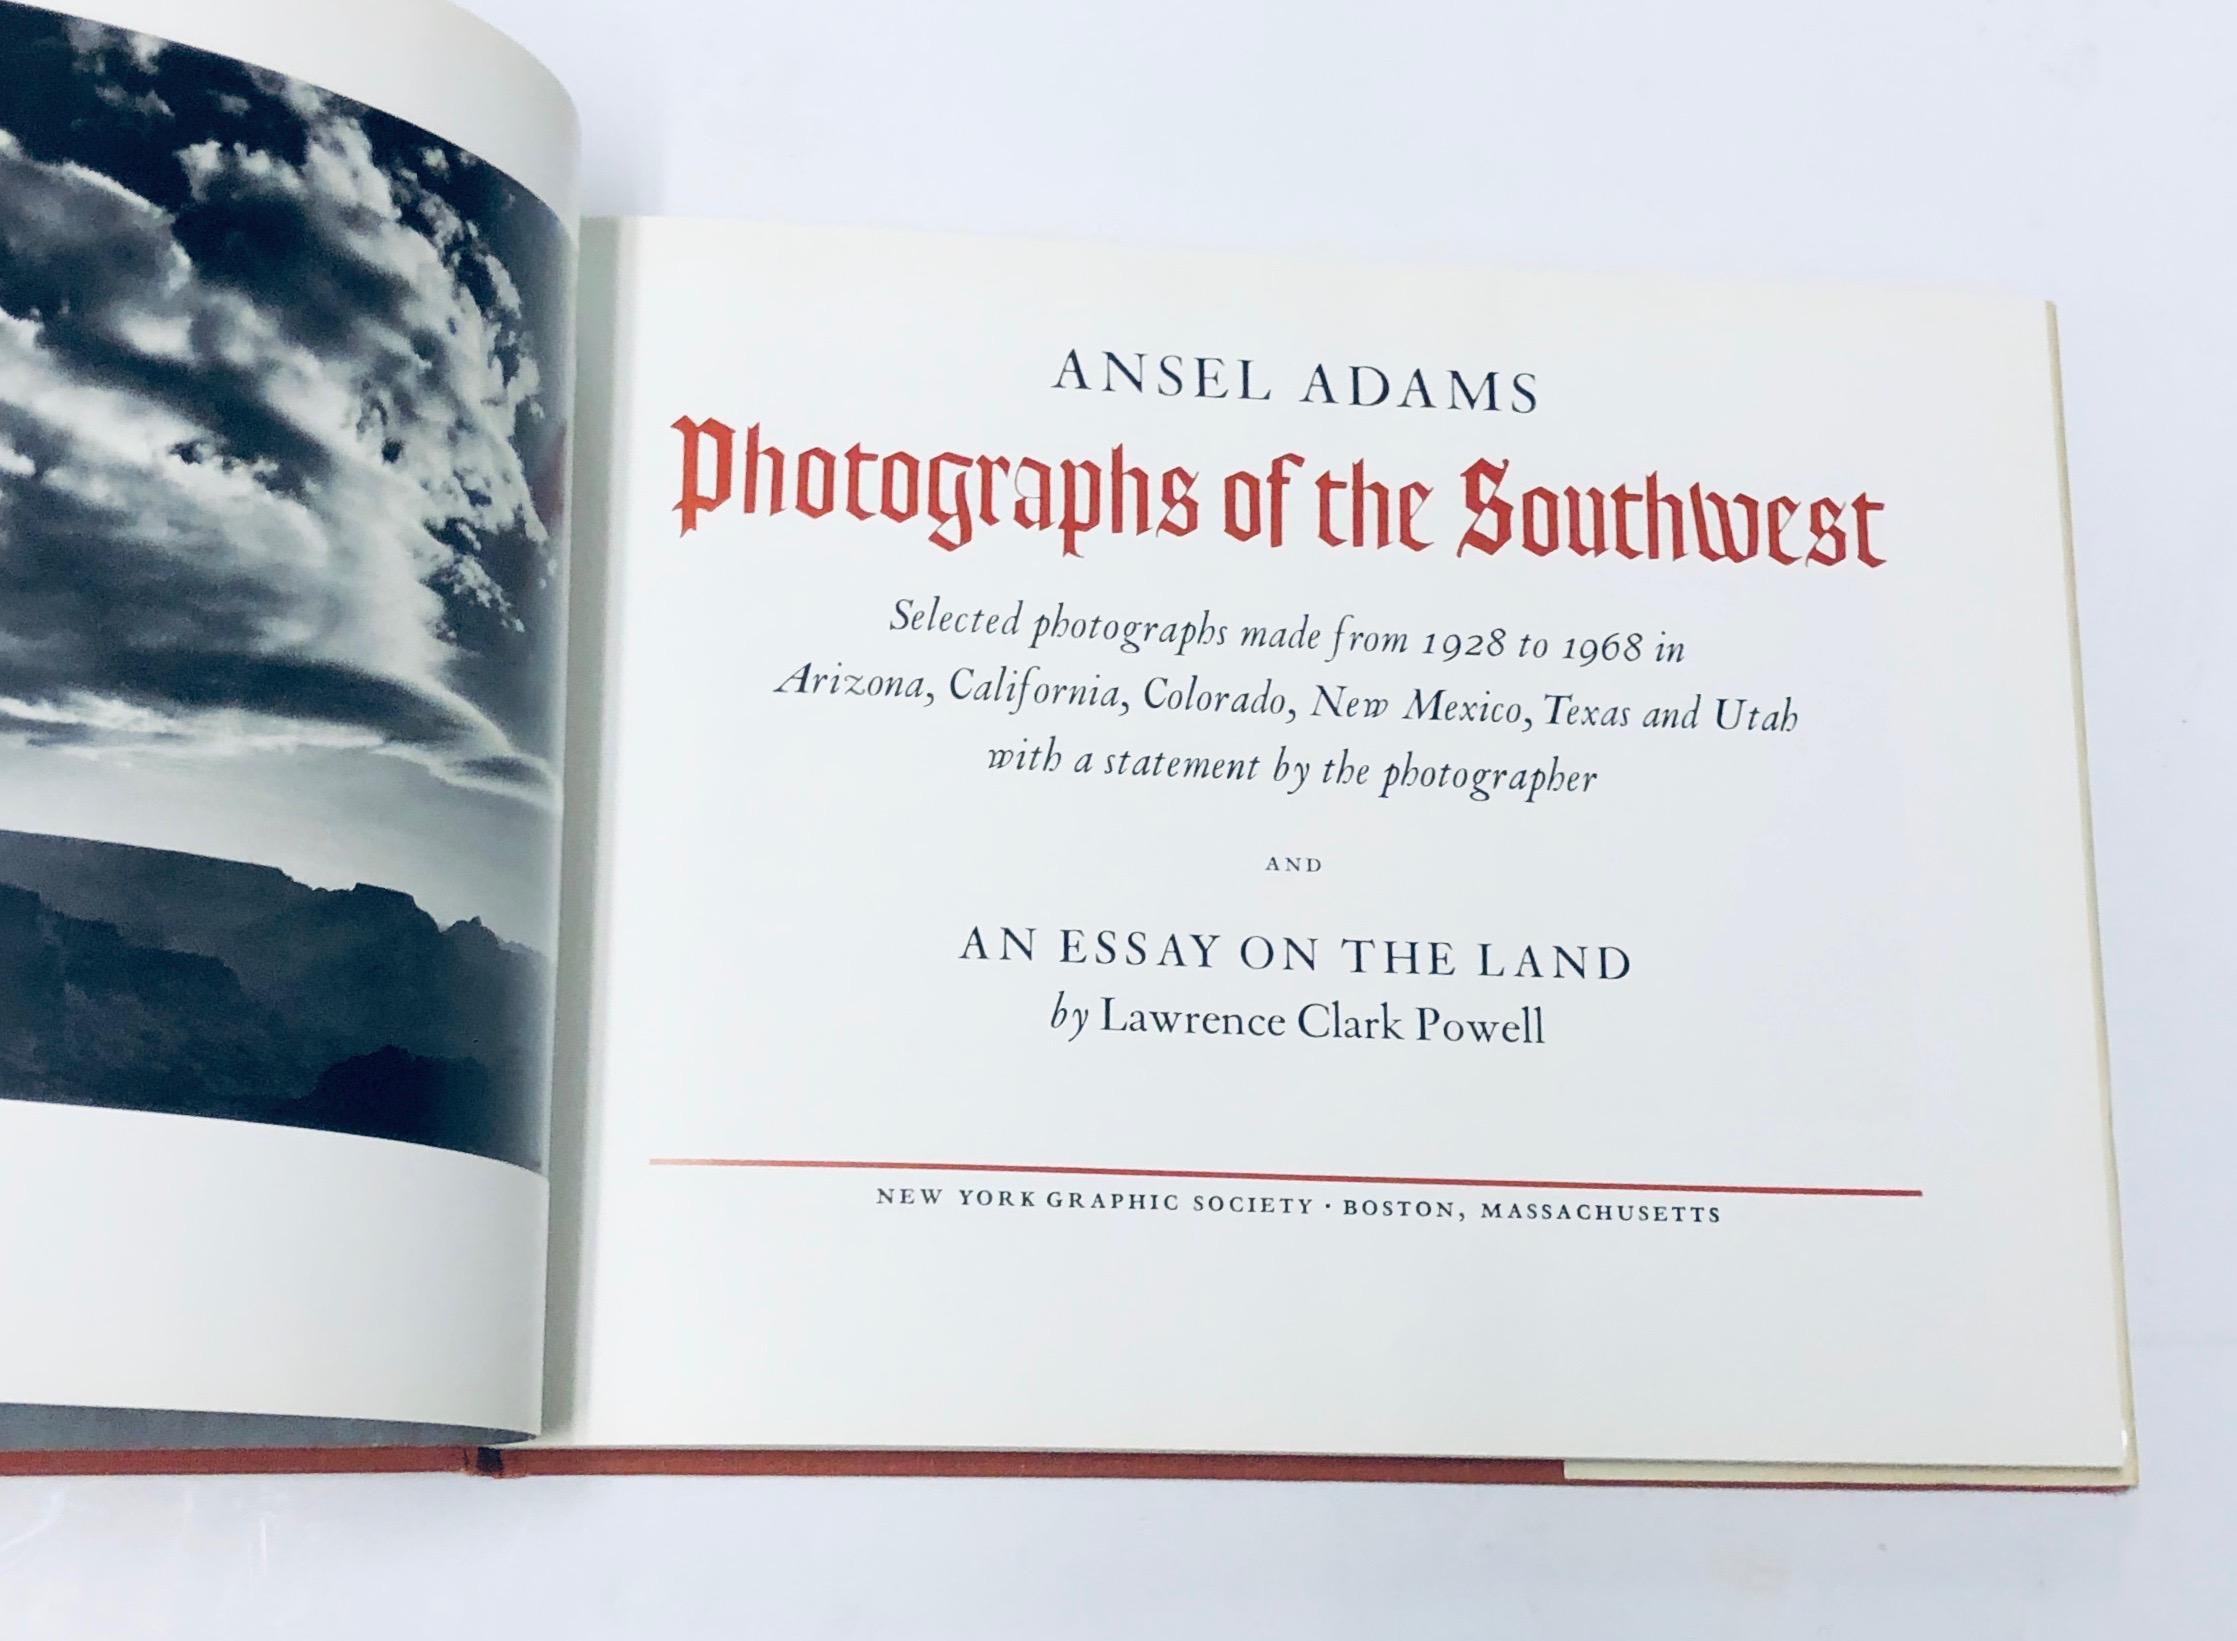 ANSEL ADAMS Photographs of the Southwest (1976)